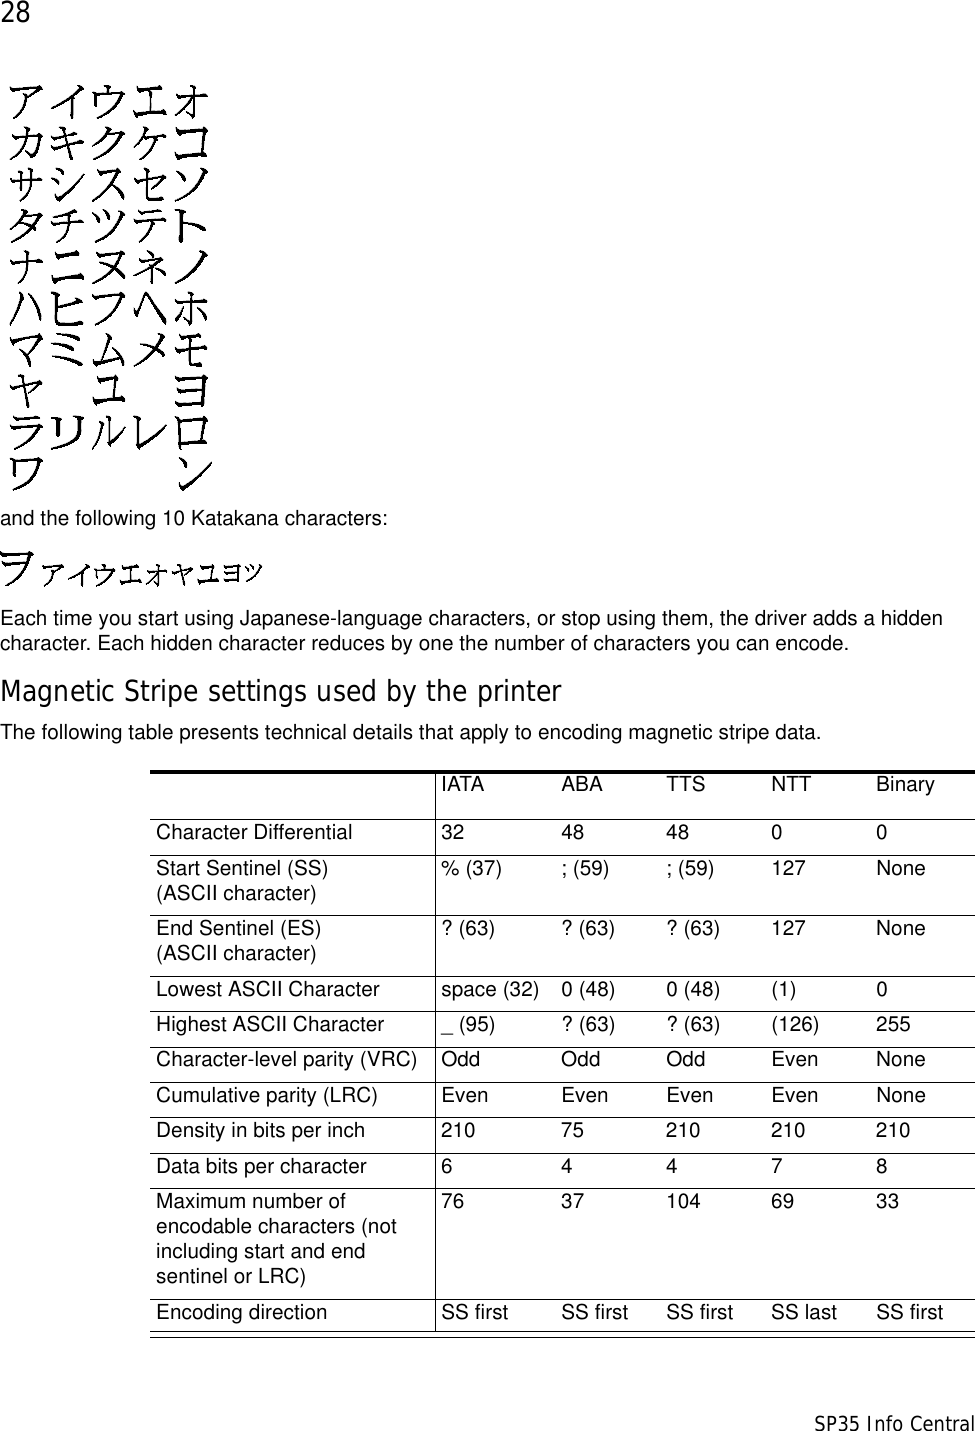 28                      SP35 Info Centraland the following 10 Katakana characters: Each time you start using Japanese-language characters, or stop using them, the driver adds a hidden character. Each hidden character reduces by one the number of characters you can encode.Magnetic Stripe settings used by the printerThe following table presents technical details that apply to encoding magnetic stripe data.IATA ABA TTS NTT BinaryCharacter Differential 32 48 48 0 0Start Sentinel (SS)(ASCII character) % (37) ; (59) ; (59) 127 NoneEnd Sentinel (ES)(ASCII character) ? (63) ? (63) ? (63) 127 NoneLowest ASCII Character space (32) 0 (48) 0 (48) (1) 0Highest ASCII Character _ (95) ? (63) ? (63) (126) 255Character-level parity (VRC) Odd Odd Odd Even NoneCumulative parity (LRC) Even Even Even Even NoneDensity in bits per inch 210 75 210 210 210Data bits per character6 4478Maximum number of encodable characters (not including start and end sentinel or LRC)76 37 104 69 33Encoding direction SS first SS first SS first SS last SS first